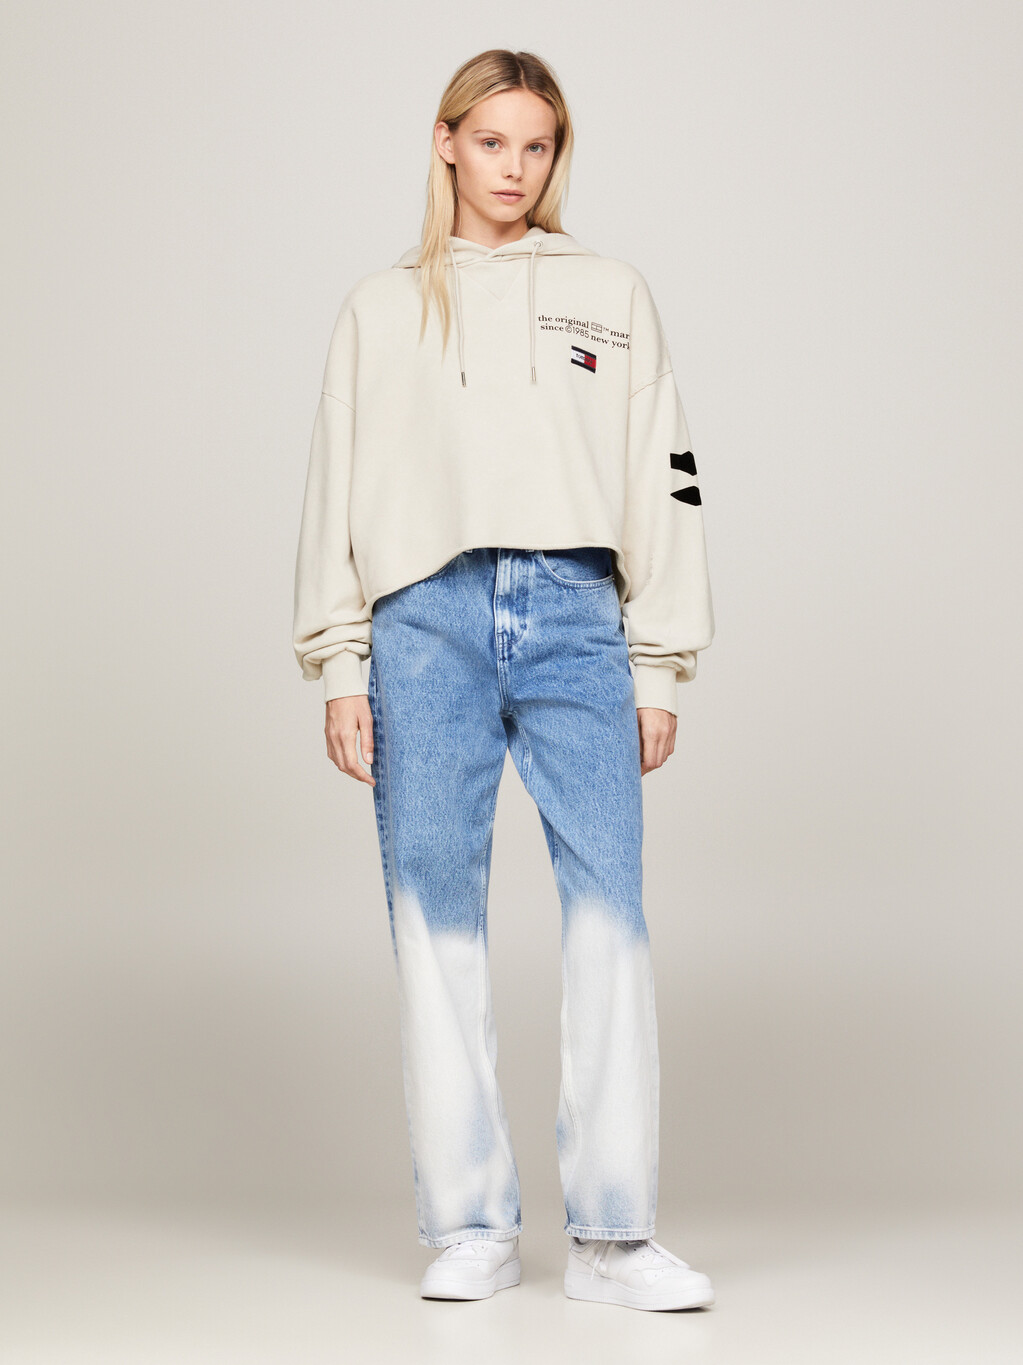 Dual Gender Cropped Oversized Back Graphic Hoody, Buckwheat, hi-res